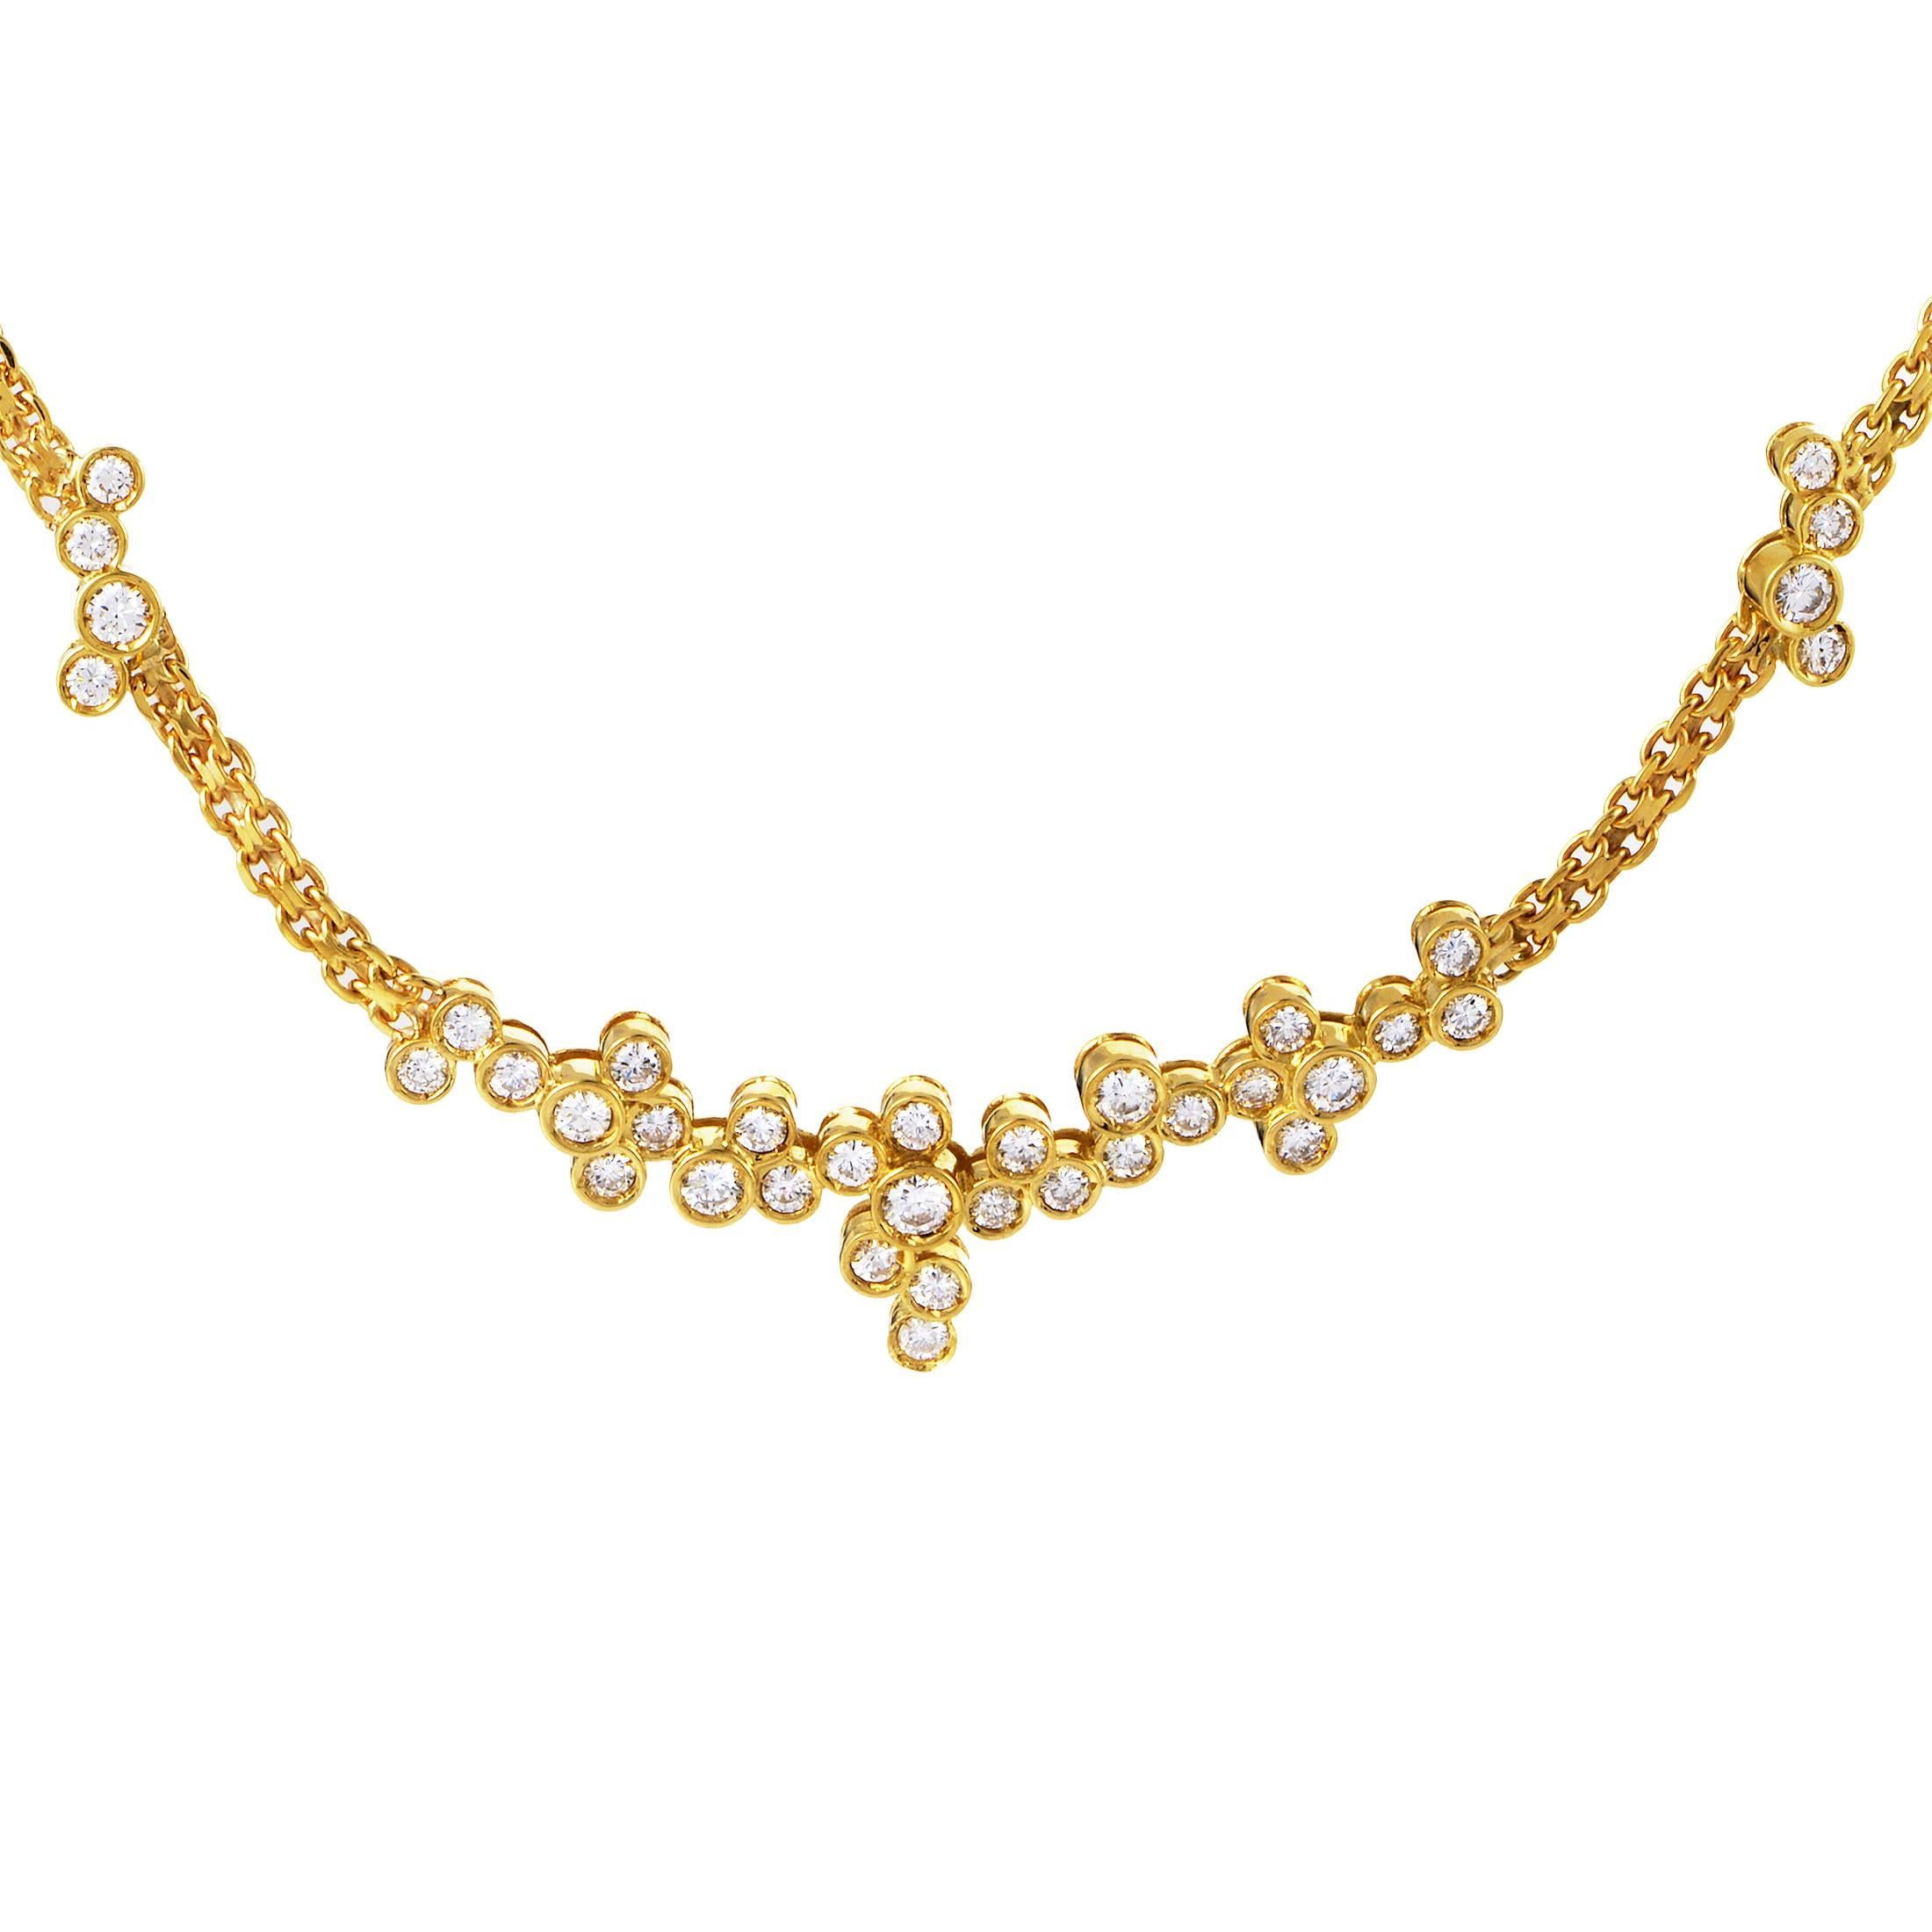 Arranged in a seemingly chaotic manner to create a mesmerizing sight, the lustrous diamonds weighing in total 1.90 carats lend their everlasting sparkle to this spellbinding 18K yellow gold necklace from Dior.
Pendant Dimensions: 0.63 x